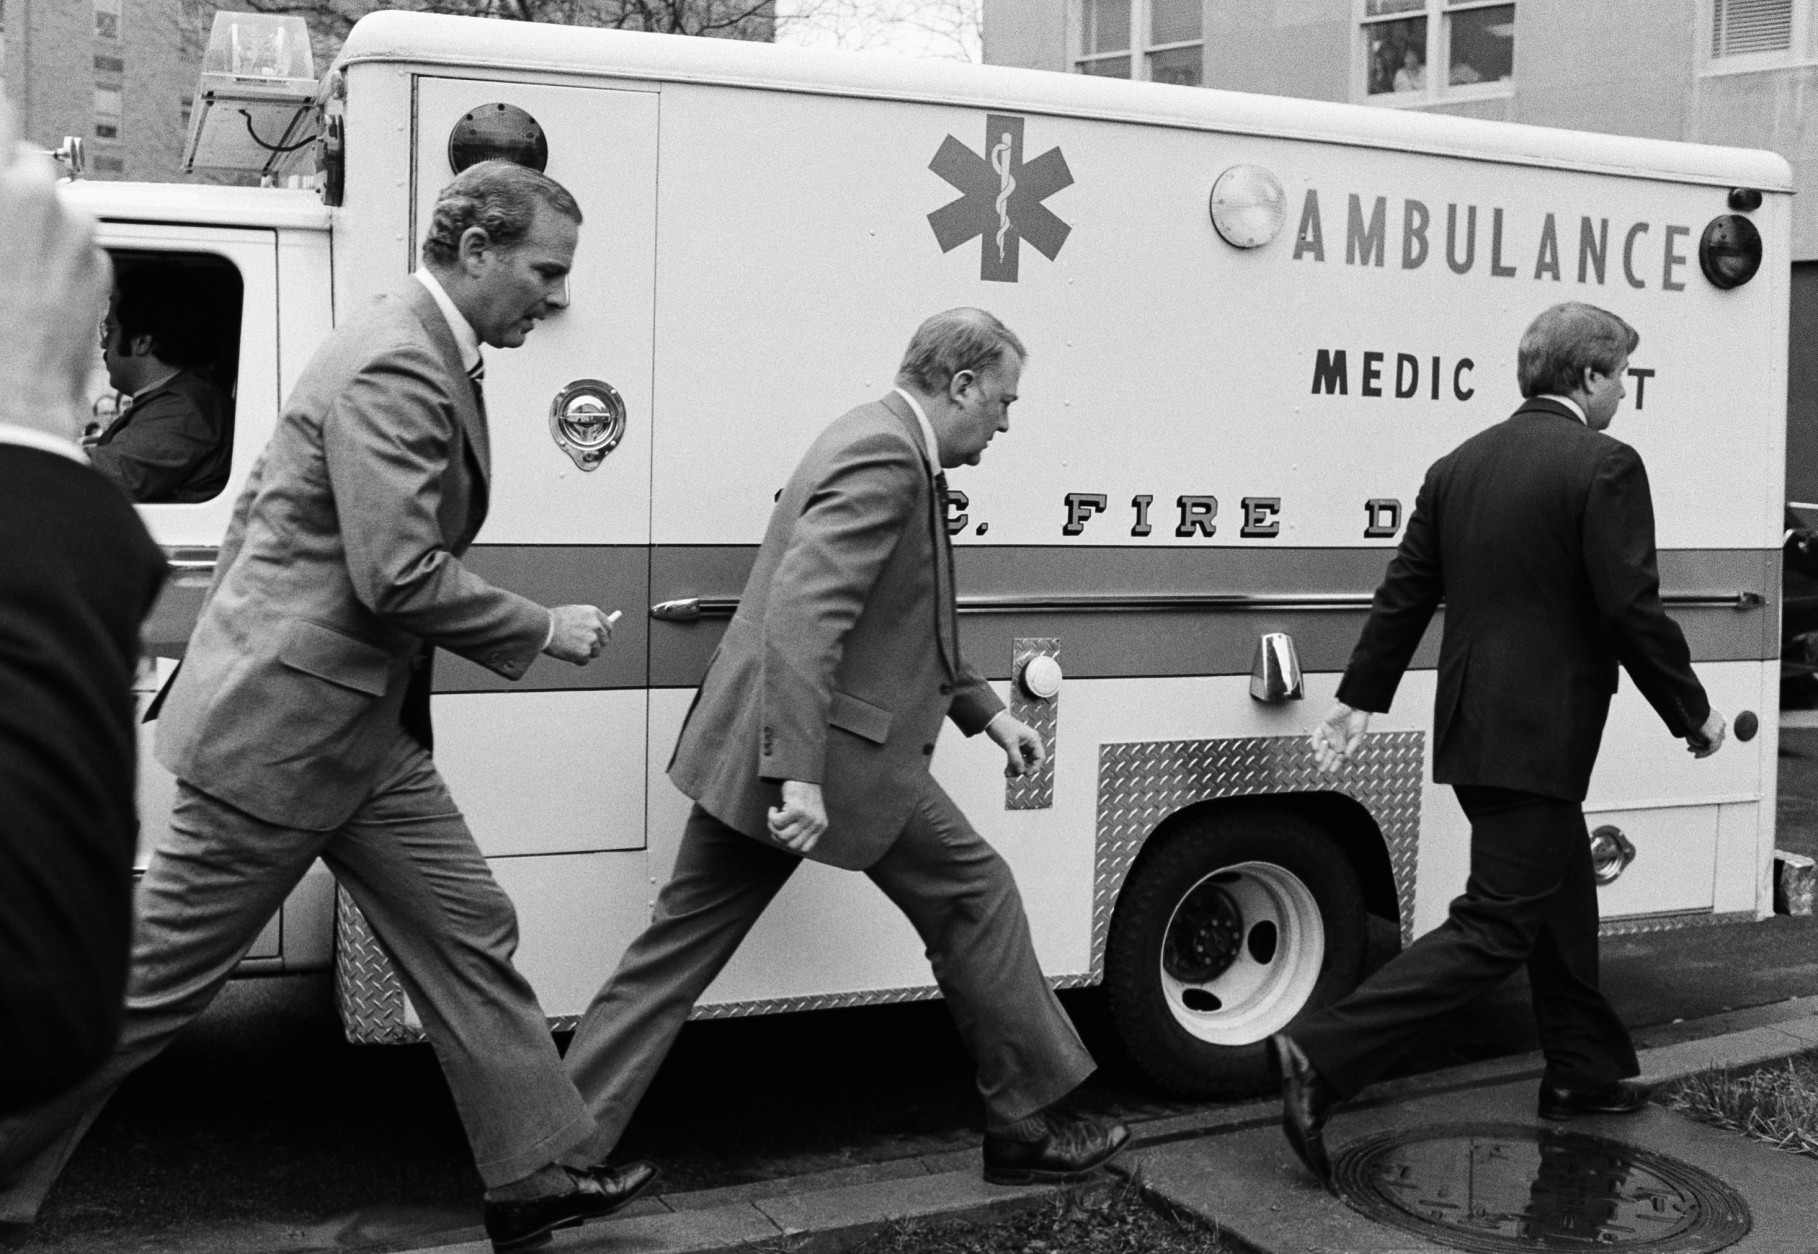 President assistants James Baker, left, Edwin Meese III and Larry Speakes arrive at George Washington University Hospital to see President Reagan in Washington on March 30, 1981. Reagan was shot as he left a Washington hotel. (AP Photo/Bob Daugherty)